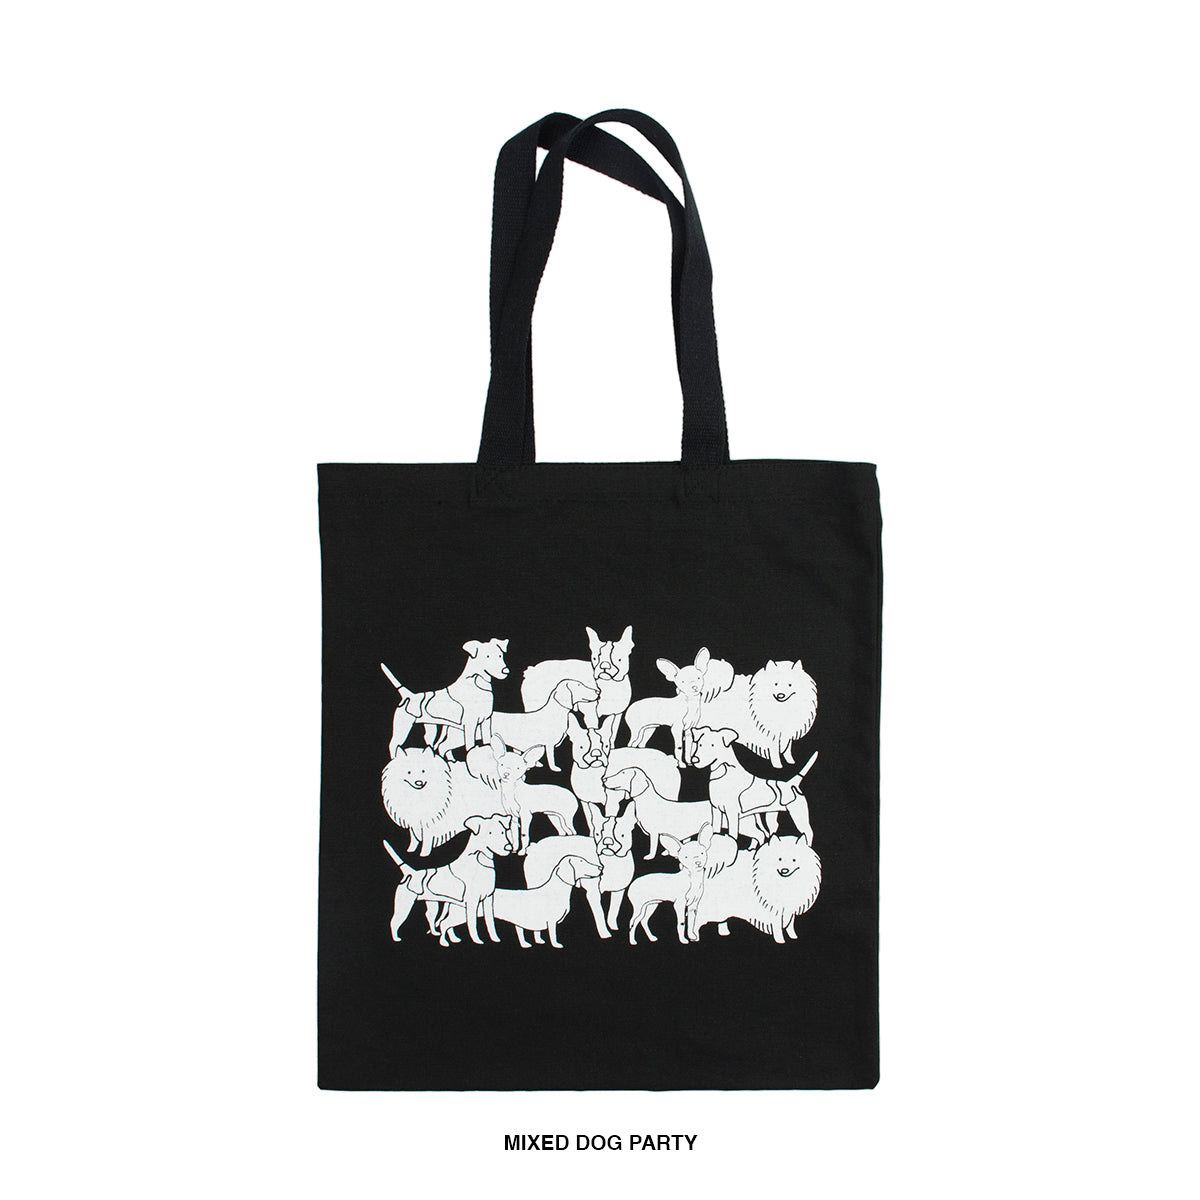 14 x 15" 100% cotton black tote with several illustrations of different dog breeds mixed together in white